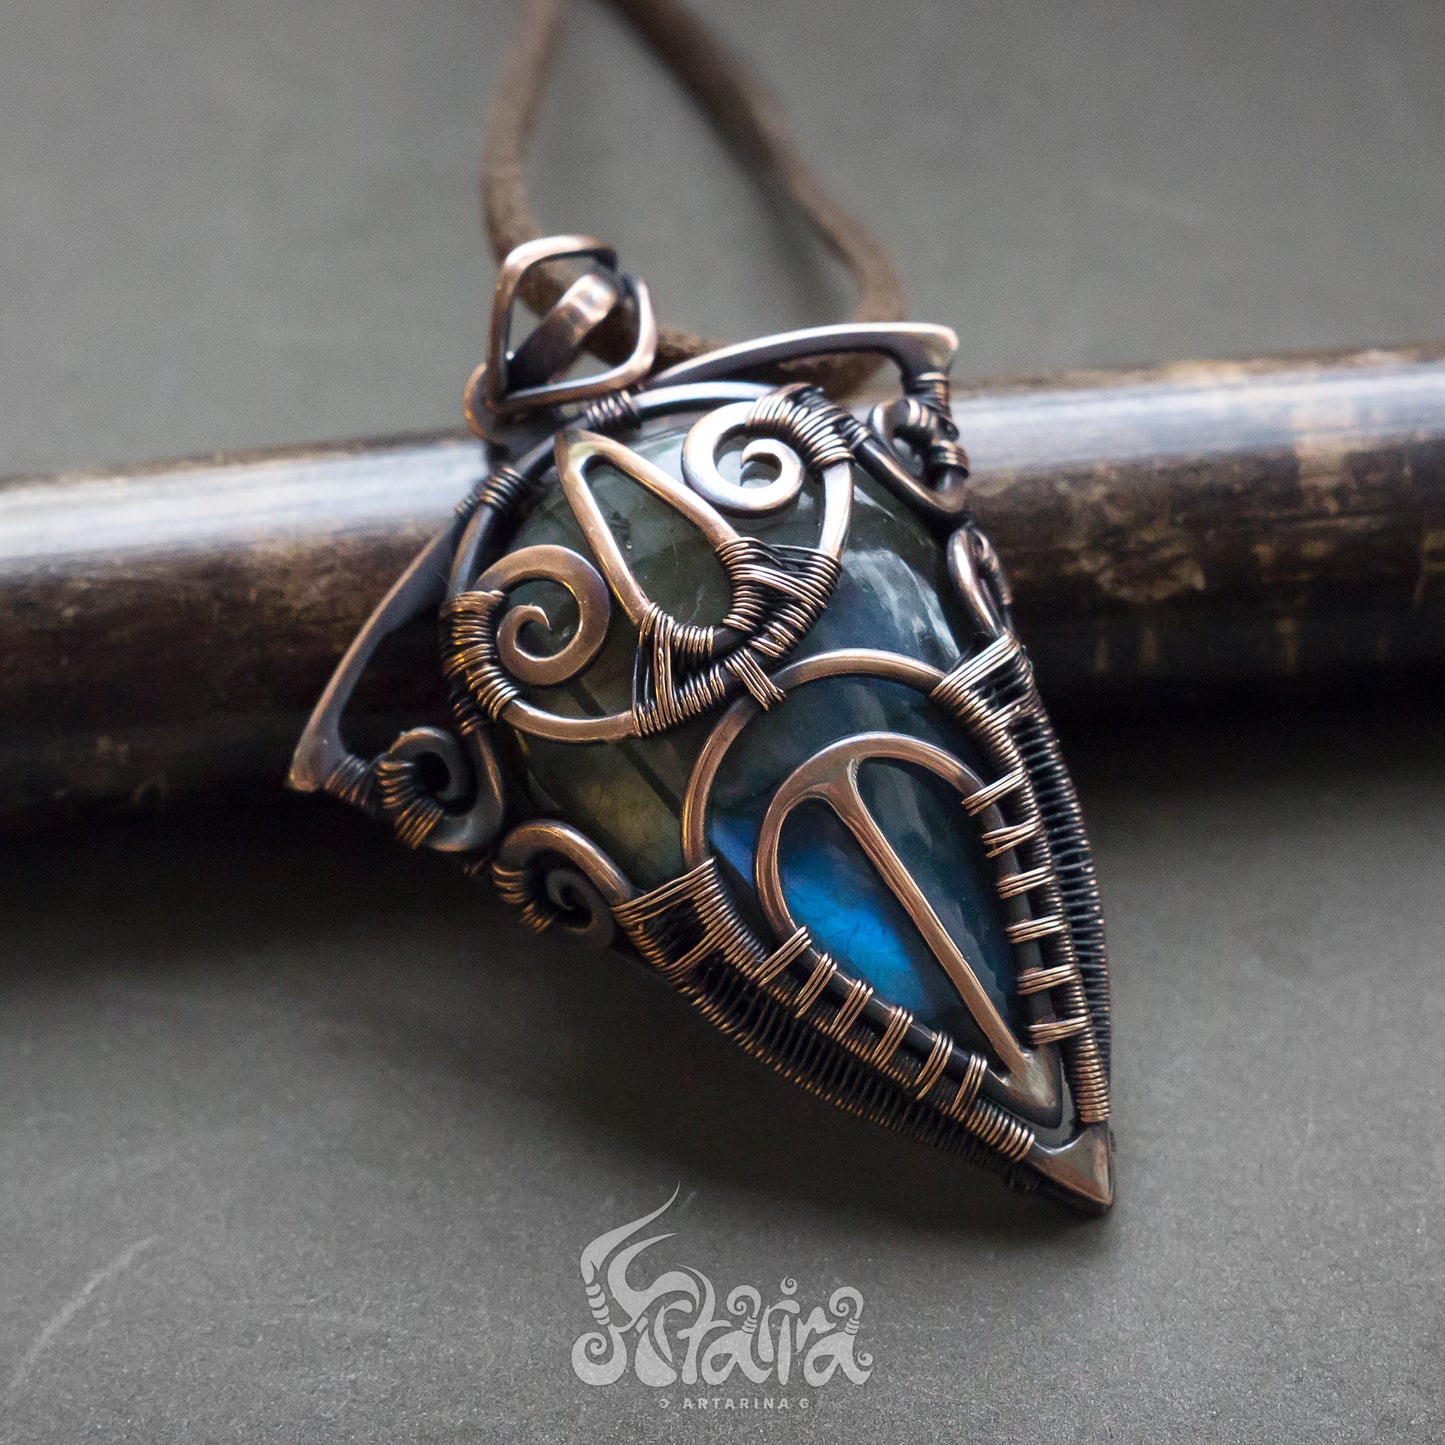 Wire wrapped copper labradorite pendant necklace jewelry gothic elven bold headywire wrapped talisman jewelry necklace pendant can be a great gift for a friend, husband, or a boyfriend. Artarina wirework necklace